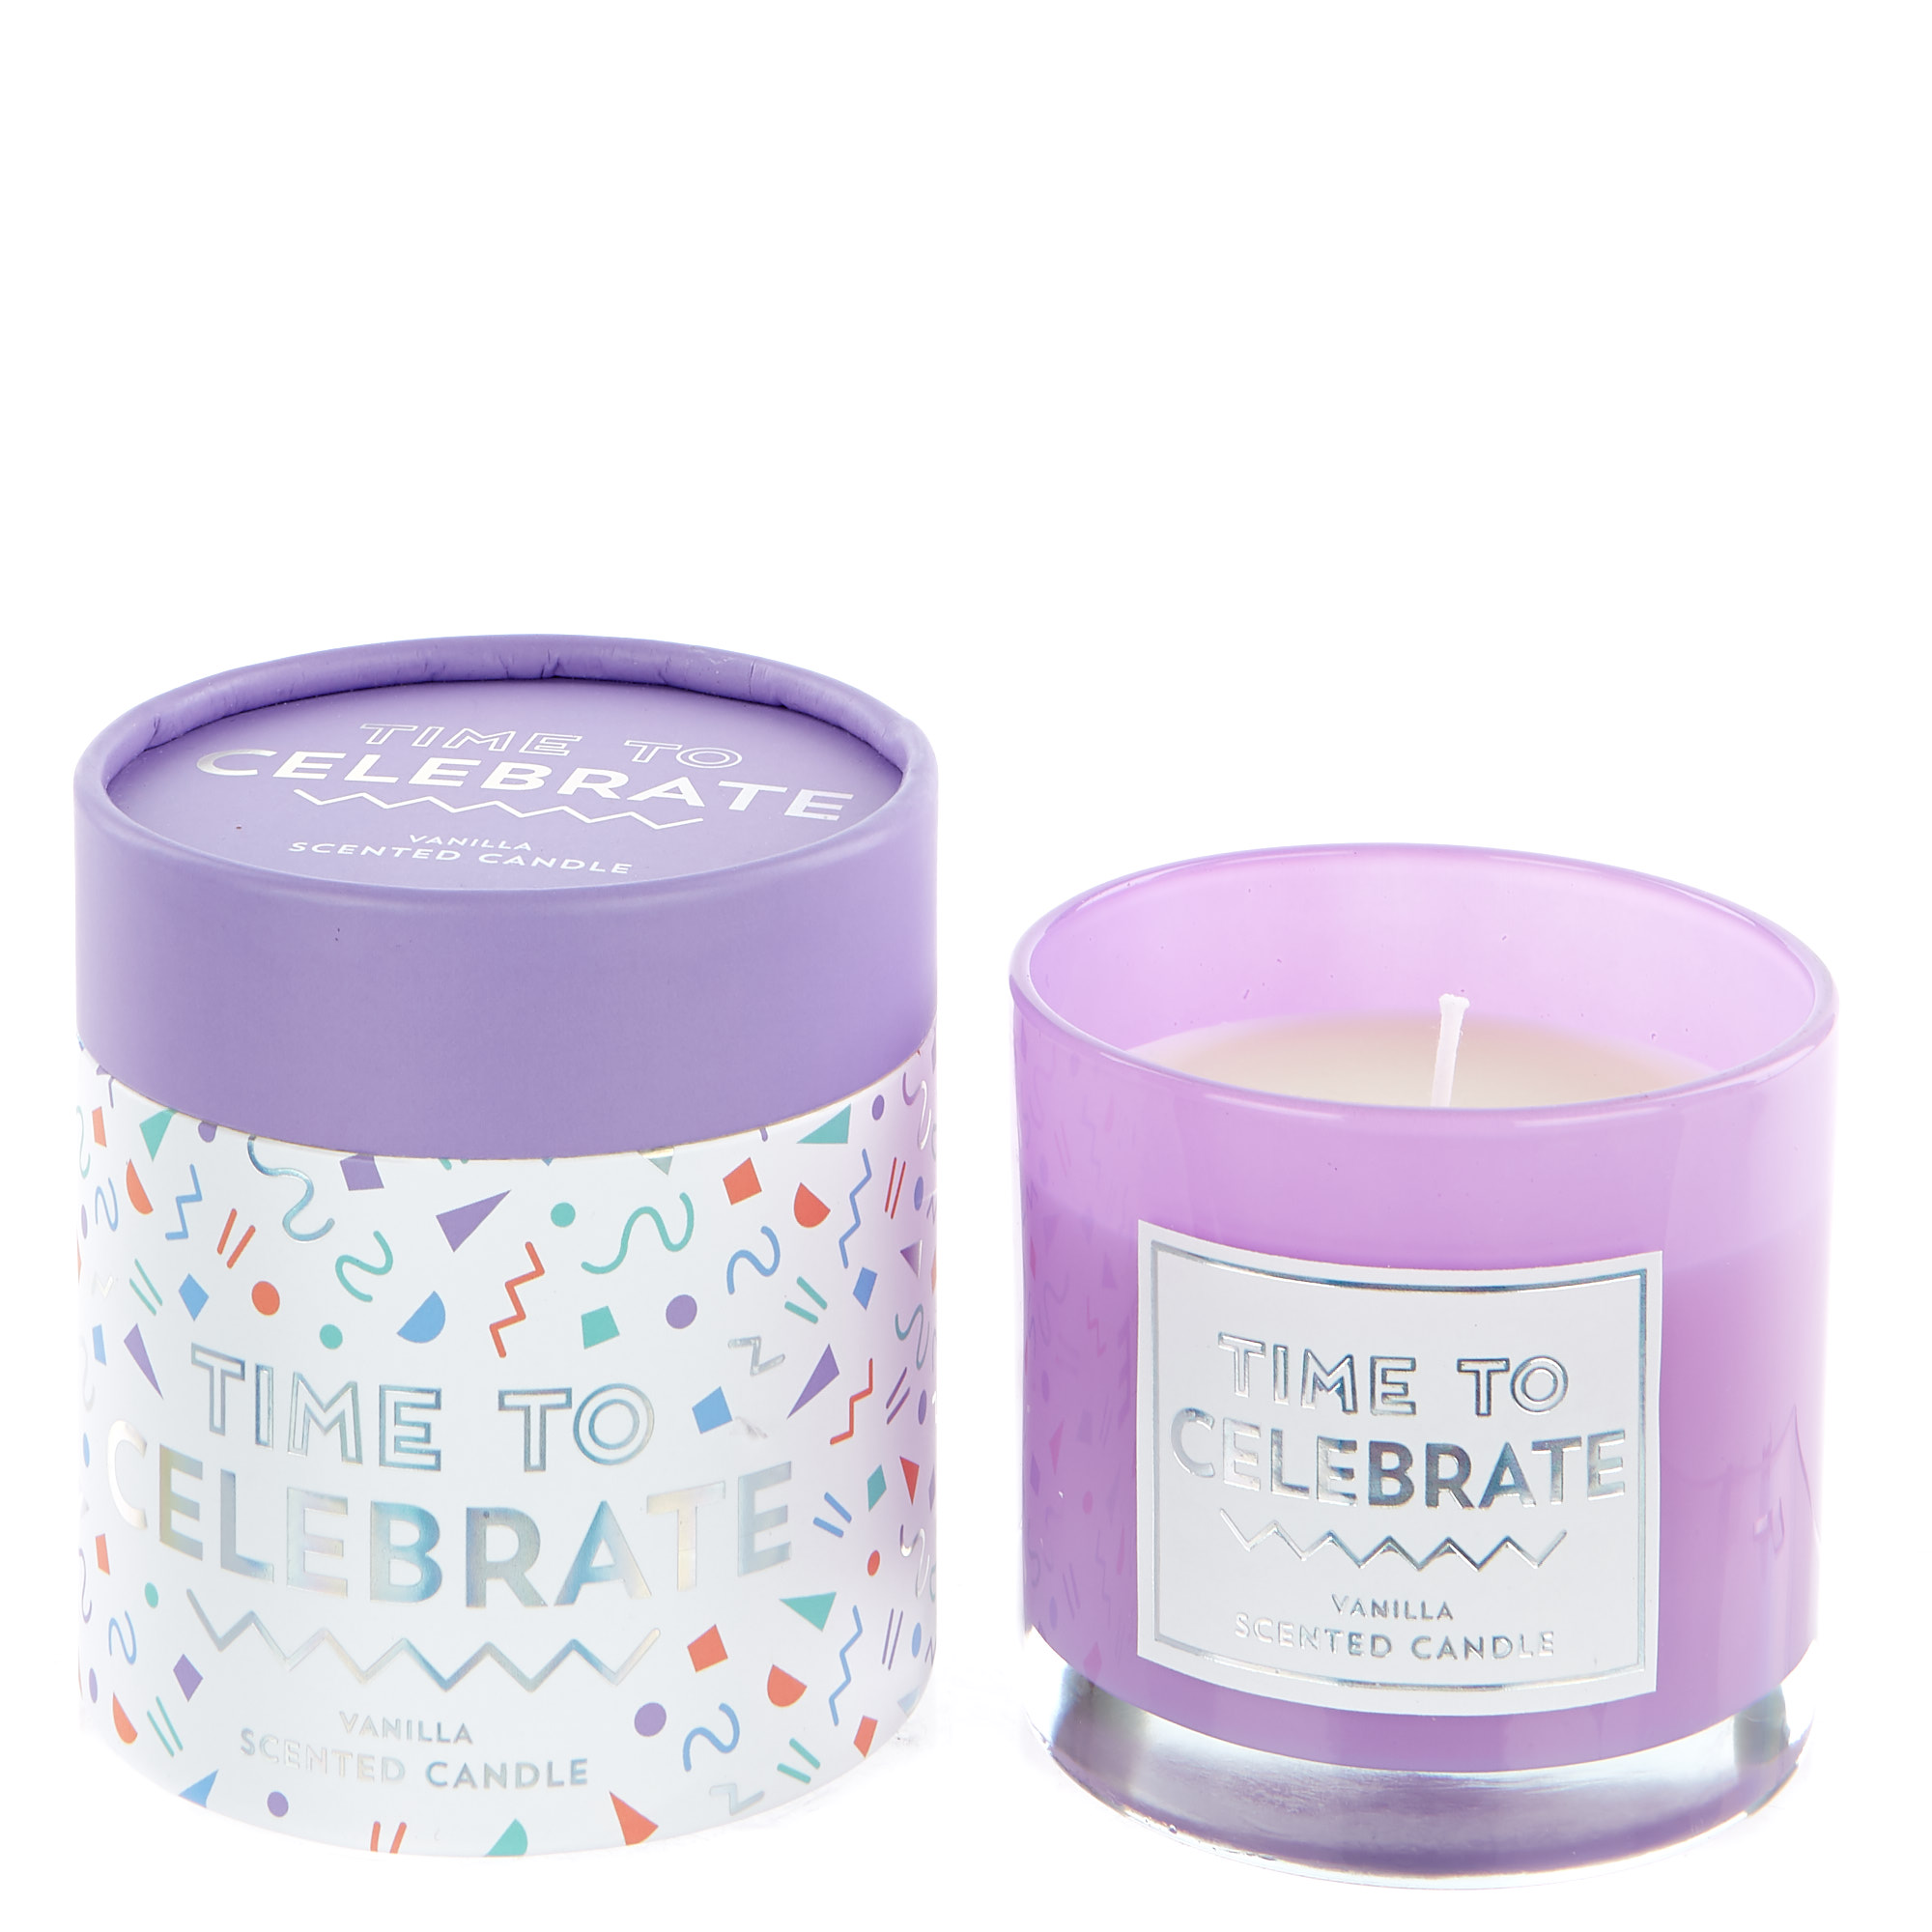 Time To Celebrate Vanilla Scented Celebration Candle